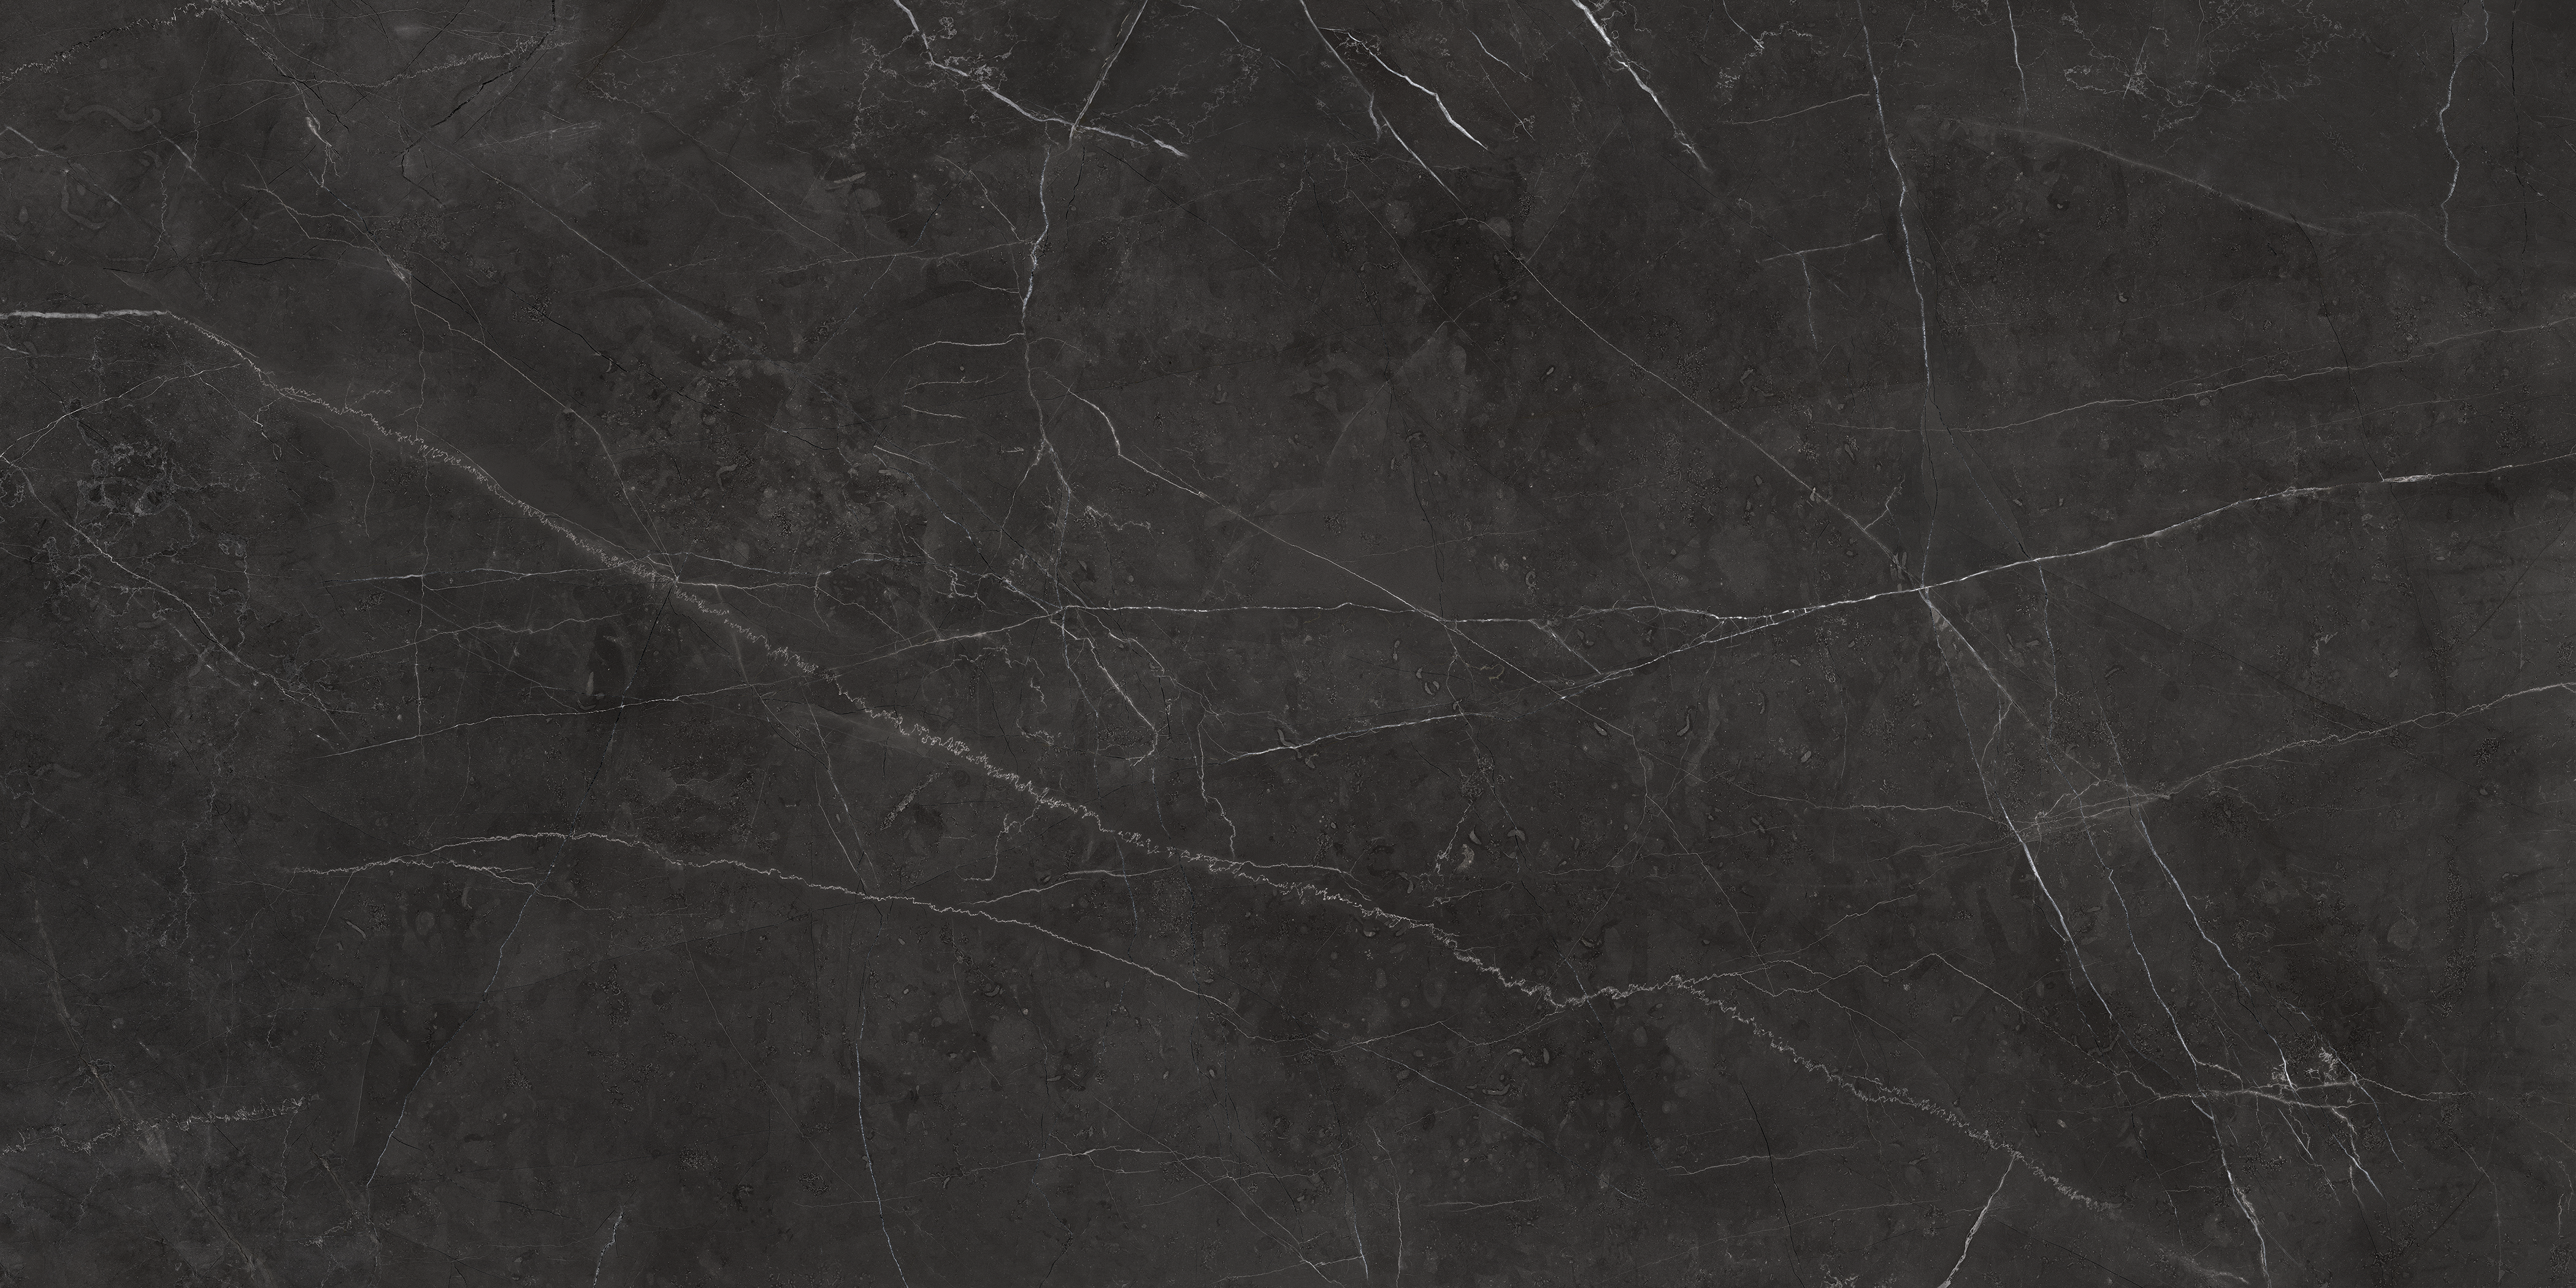 nero venato pattern glazed porcelain field tile from la marca anatolia collection distributed by surface group international polished finish rectified edge 24x48 rectangle shape